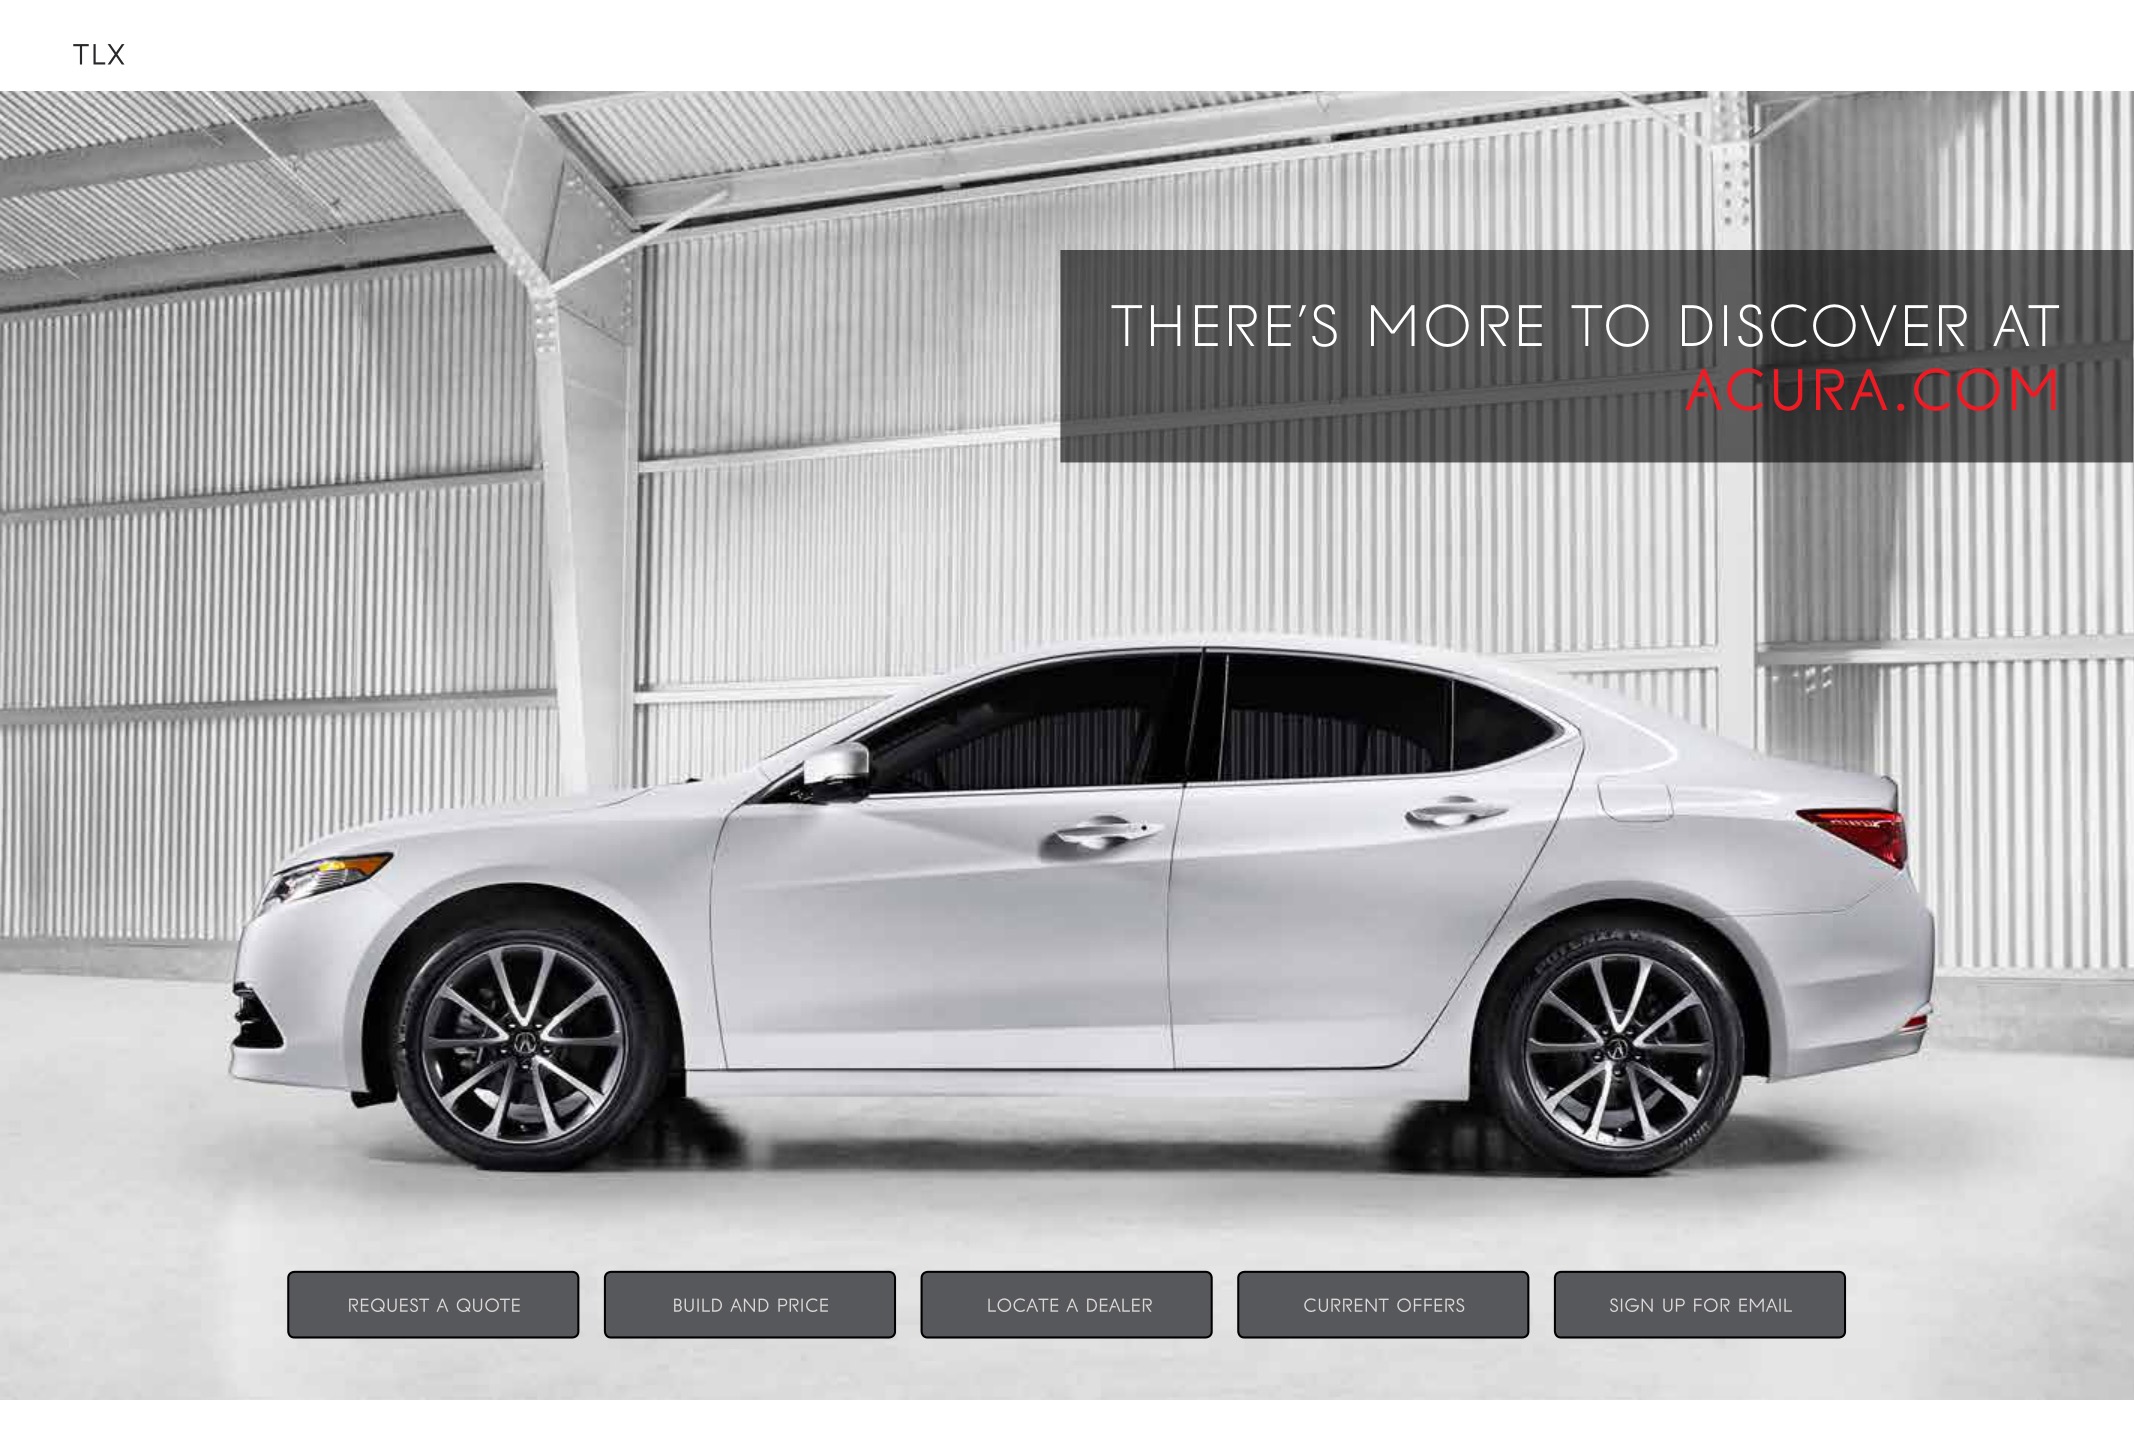 2015 Acura TLX Brochure Page 8